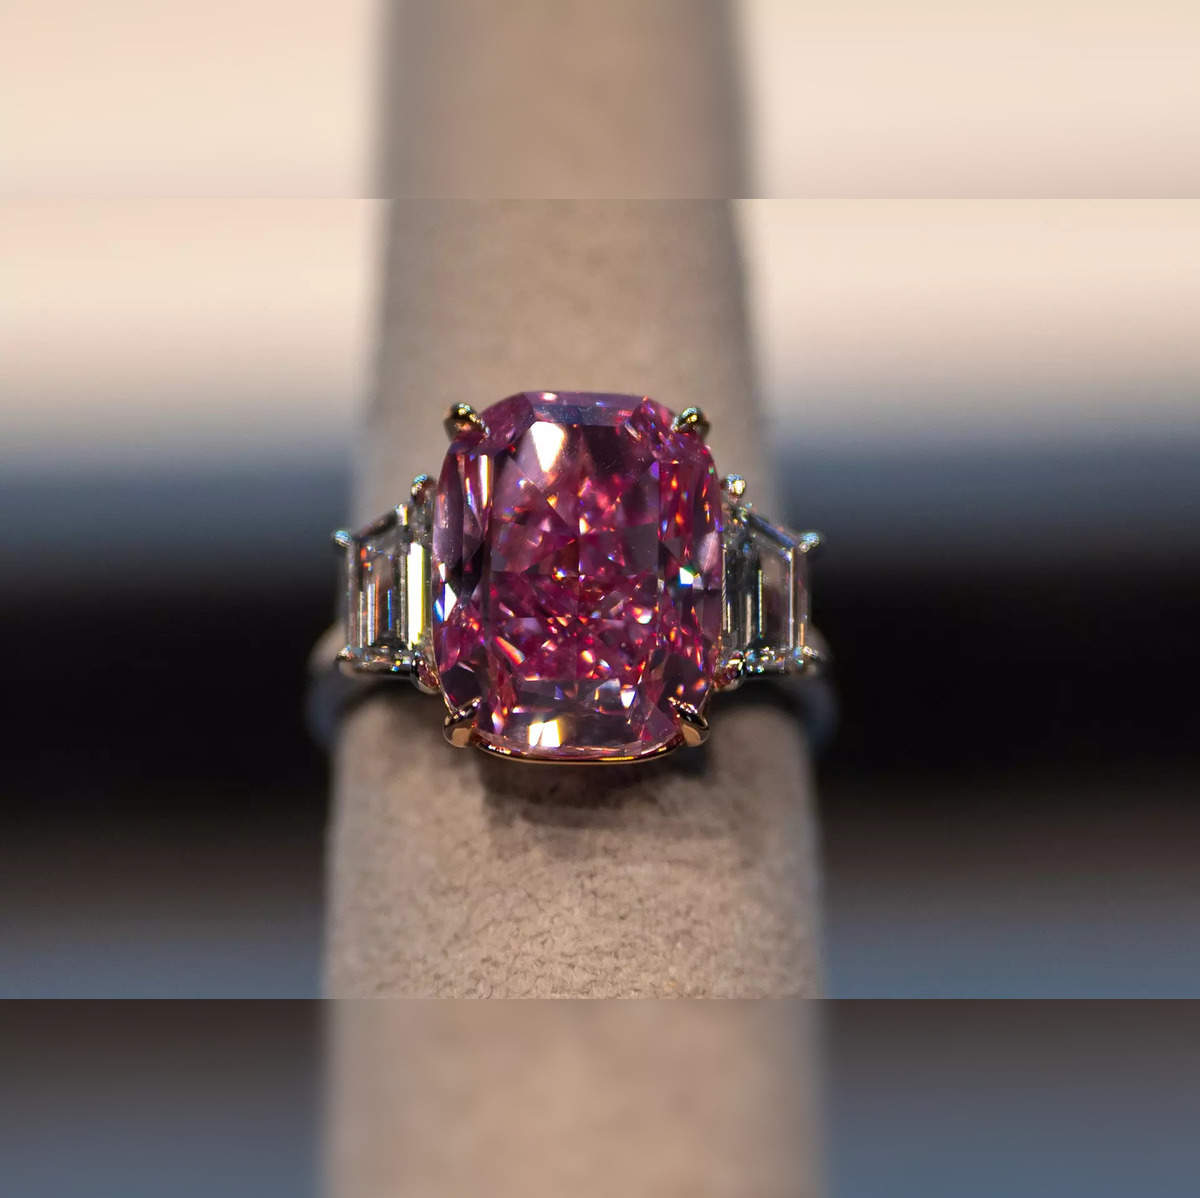 Rare Pink Diamonds - Size, Color, and Clarity